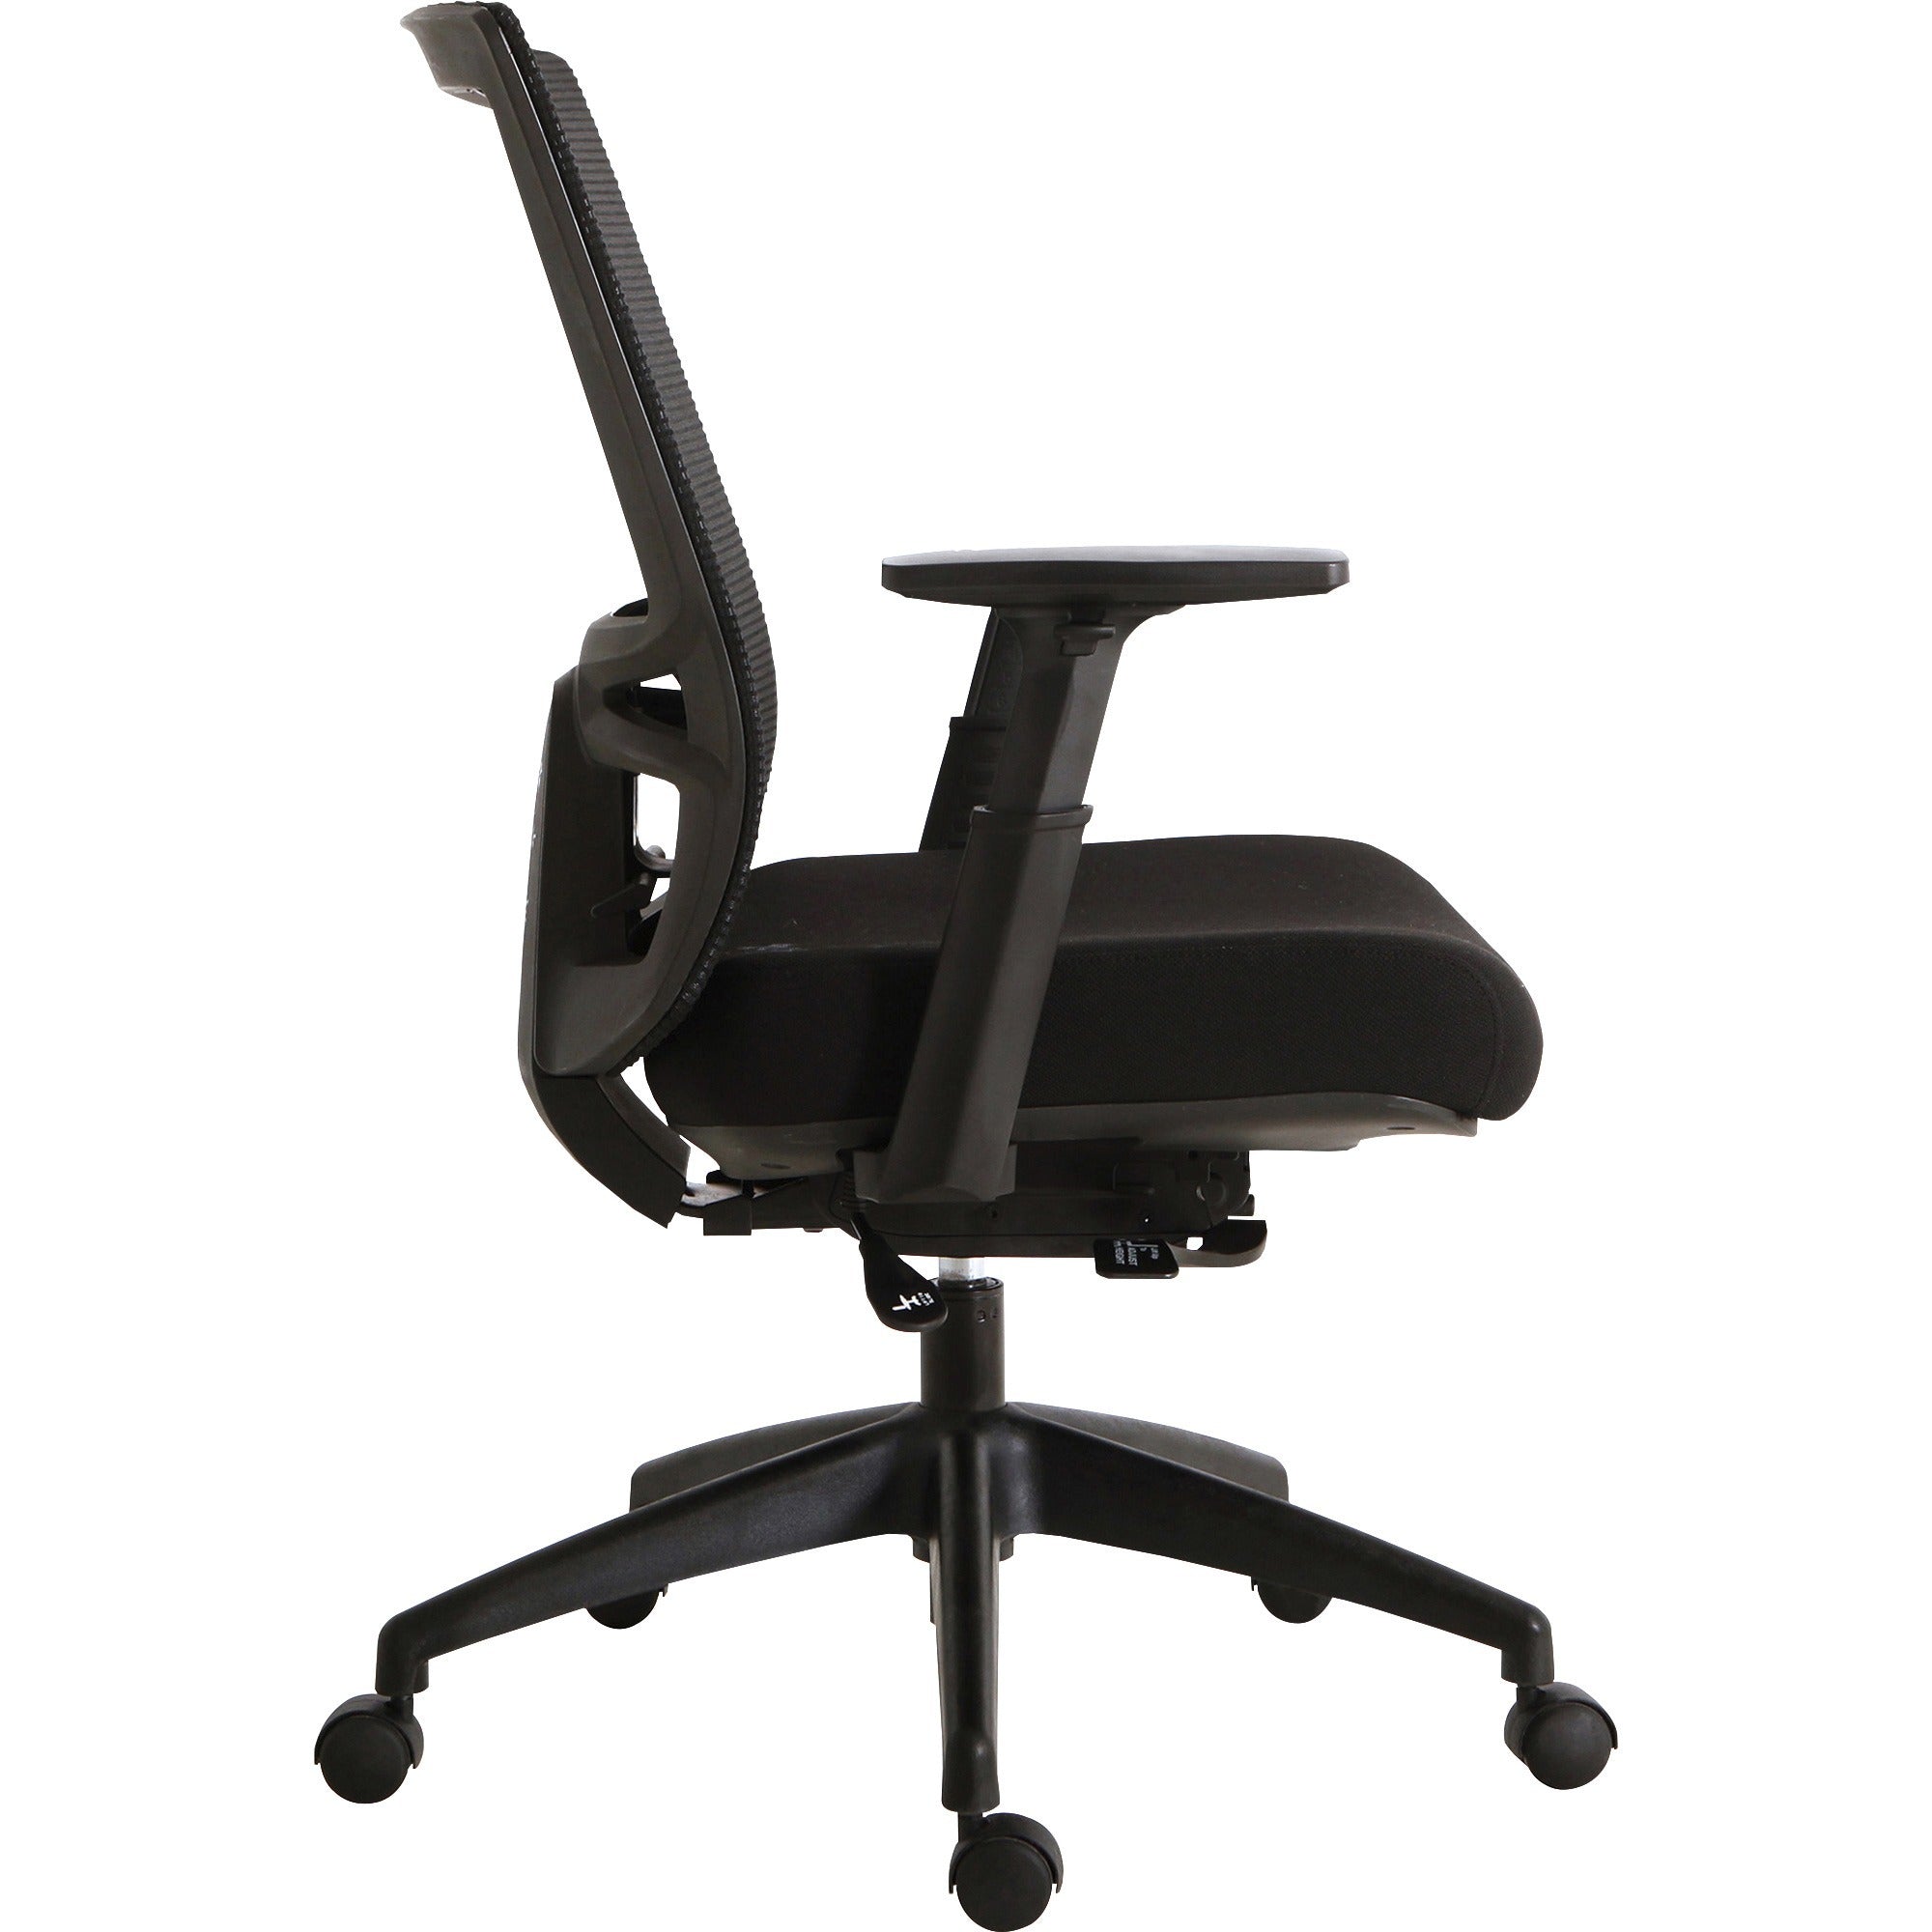 lorell-mesh-mid-back-office-chair-fabric-seat-mid-back-5-star-base-black-1-each_llr62626 - 6